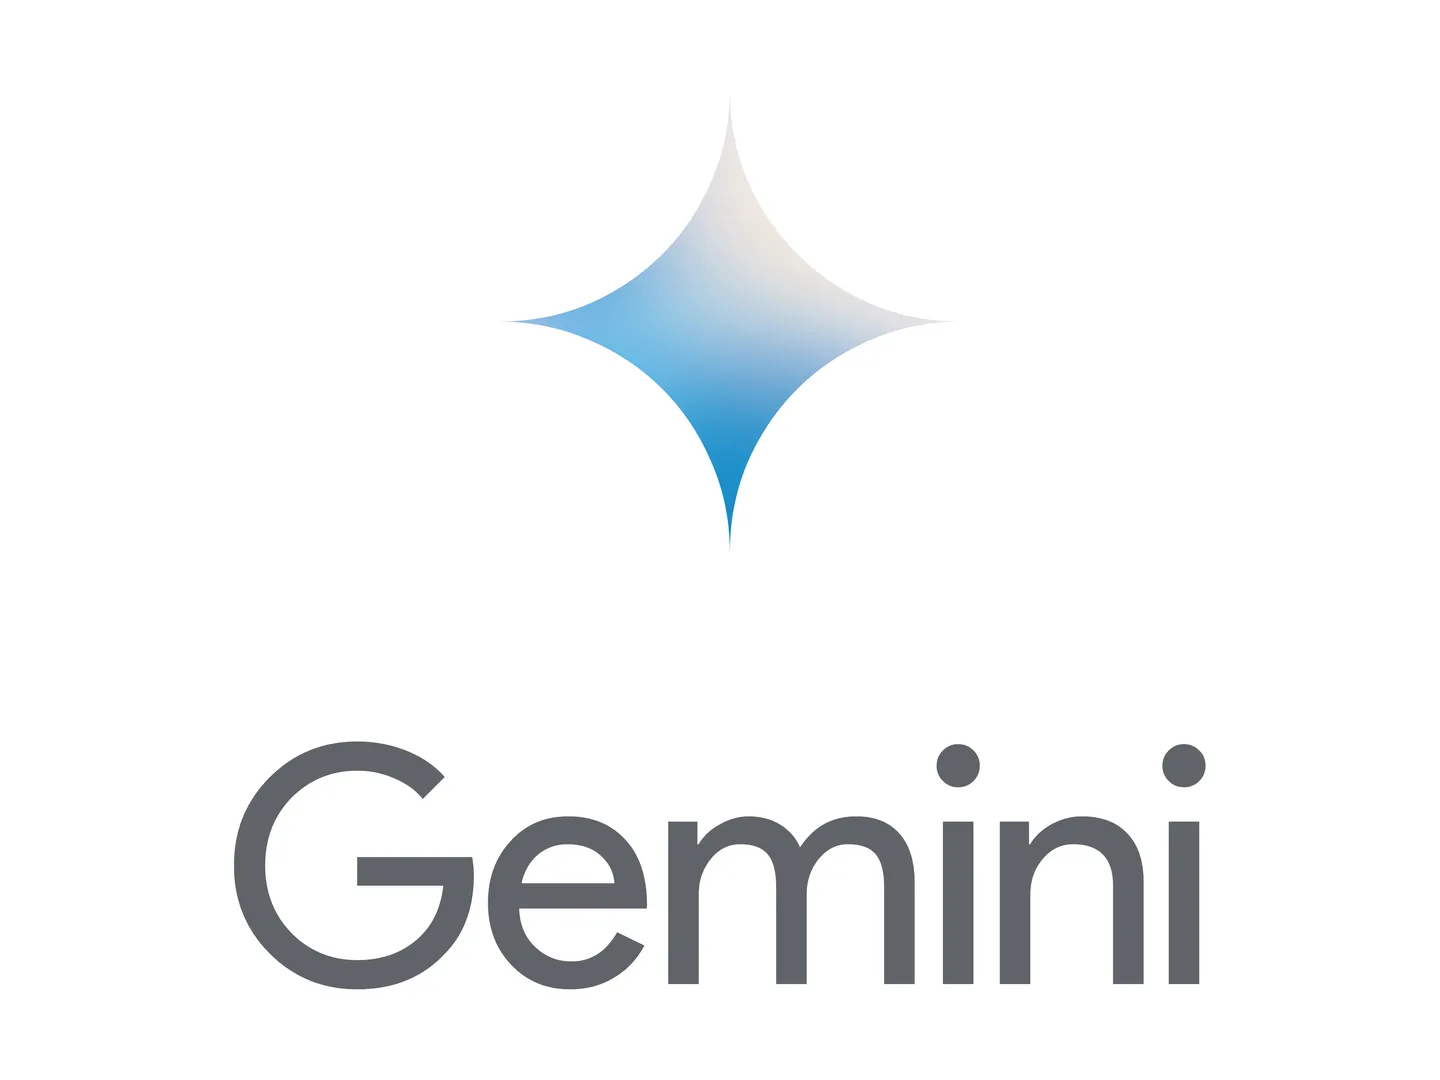 Gemini represents a significant leap forward in AI-powered collaboration by combining cutting-edge generative AI and natural language processing